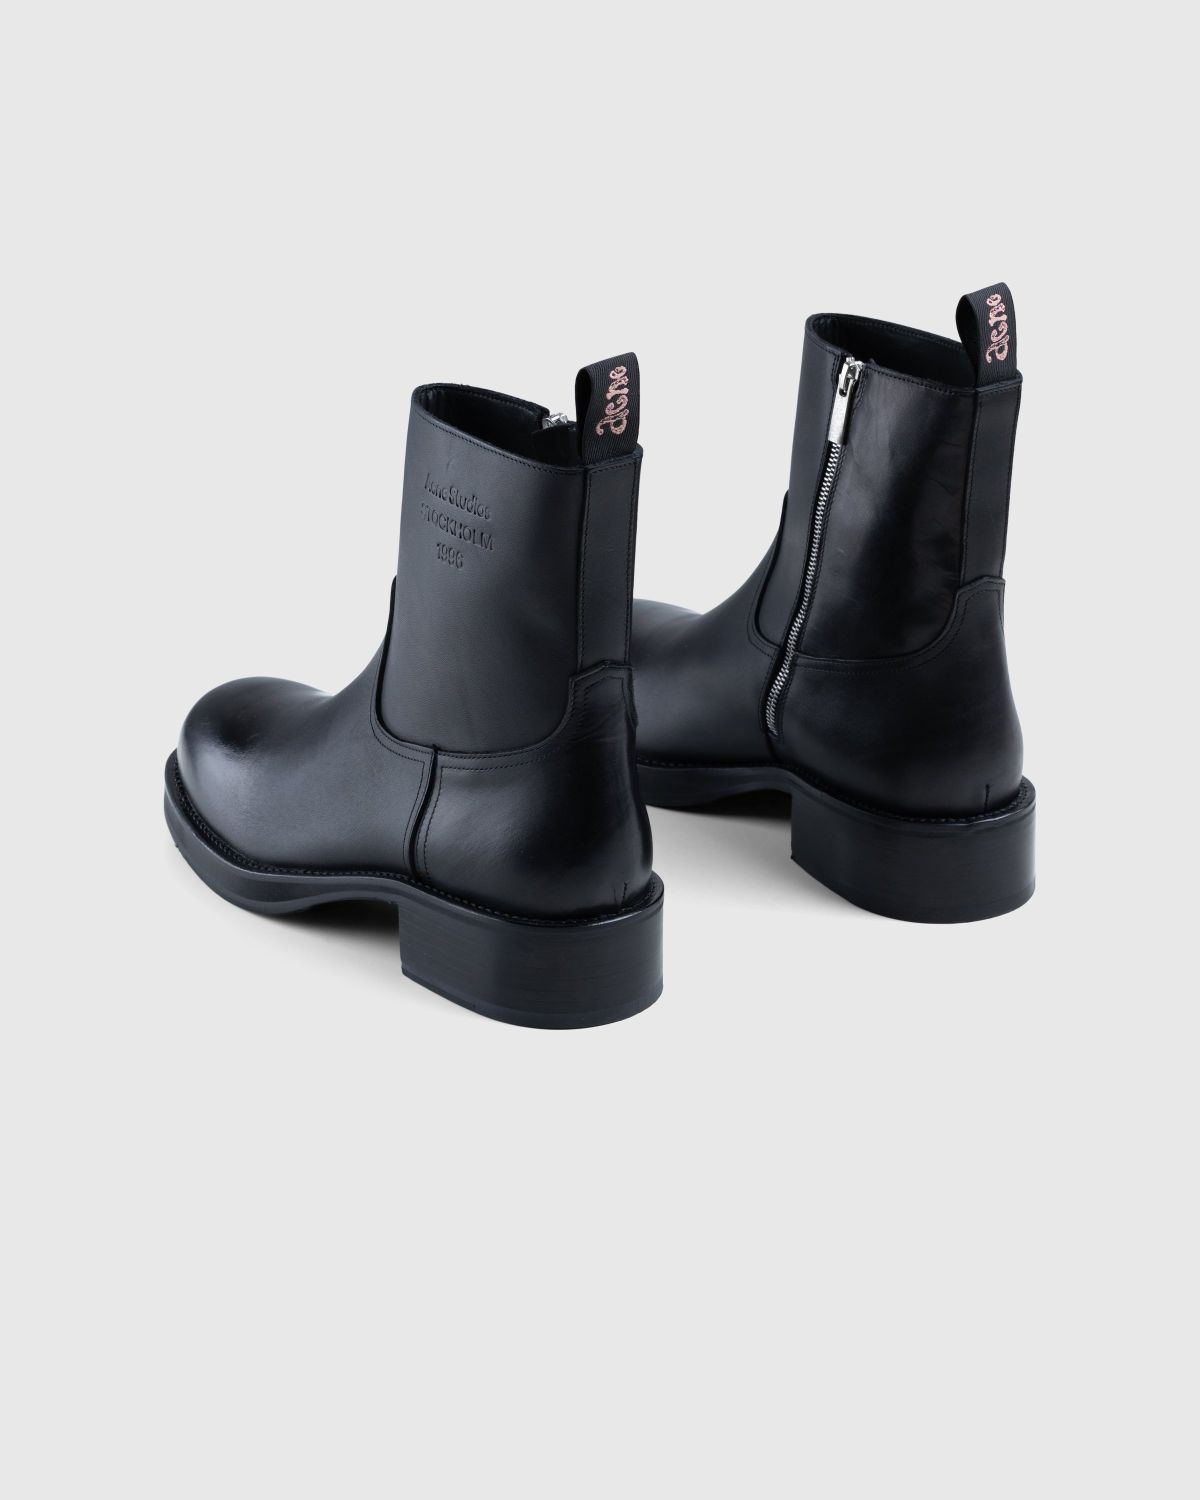 Acne Studios – Sprayed Leather Ankle Boots Black - Zip-up & Buckled Boots - Black - Image 4